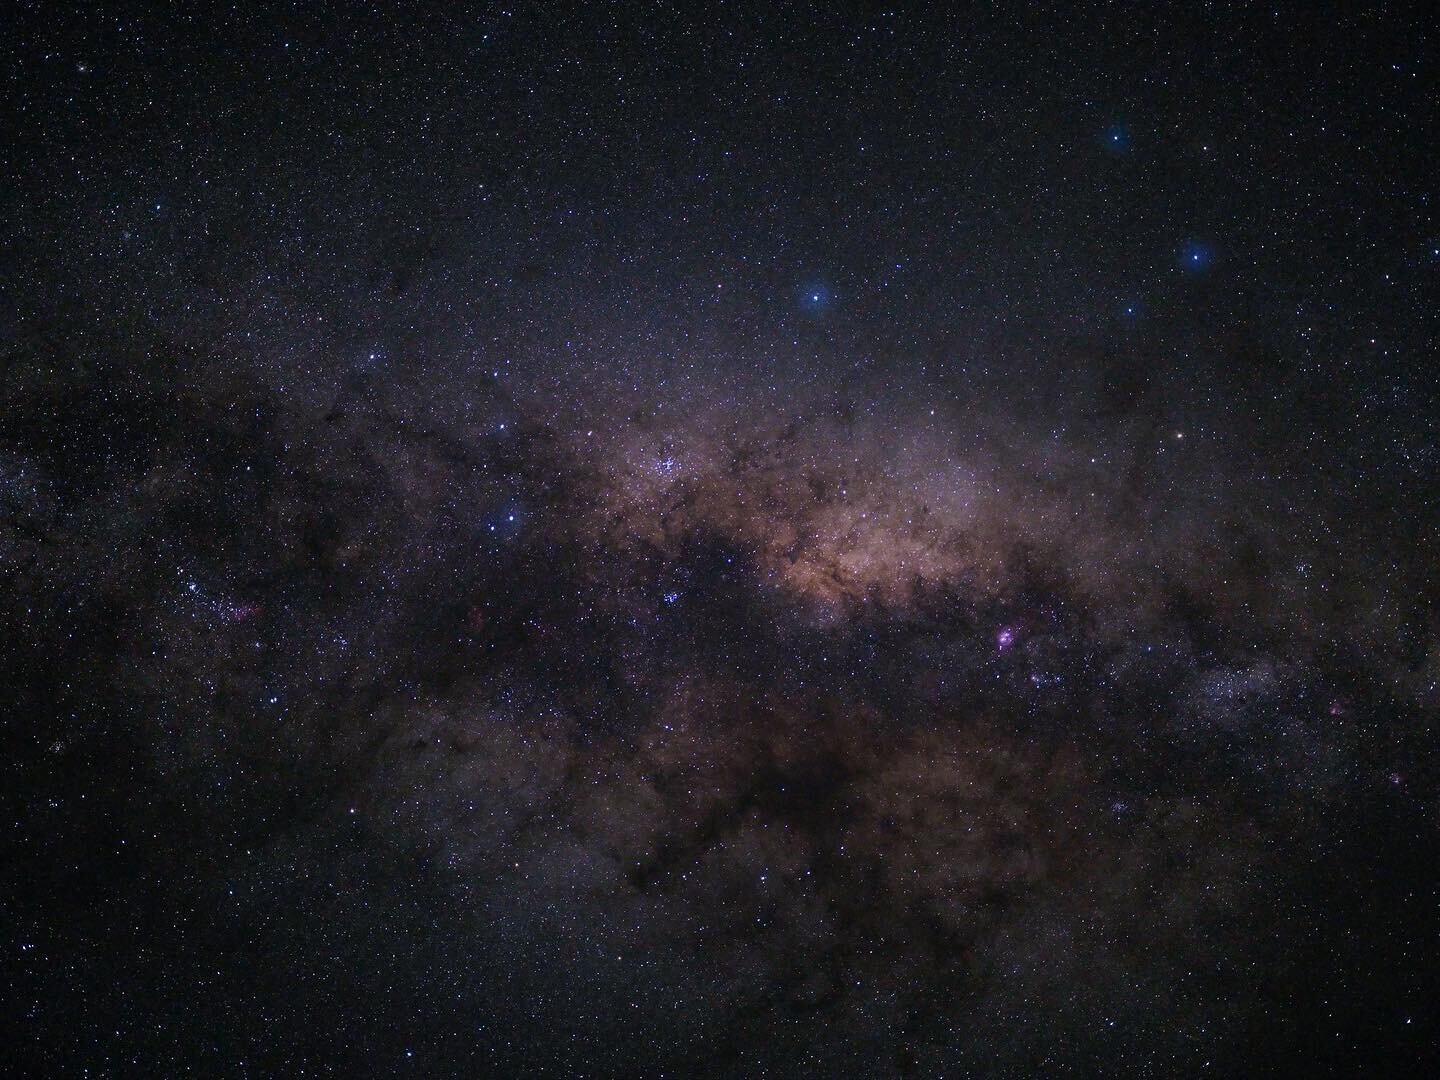 Our view of the Milky Way taken in one 5s exposure at 12,800iso despite the high iso the detail is astonishing. You can also see the Kiwi in the bottom right of the image.
.
.
.
.
.
@nasa #milkyway #kiwi #astronomy #fujifilmgfx100s @fujifilm_profilm 